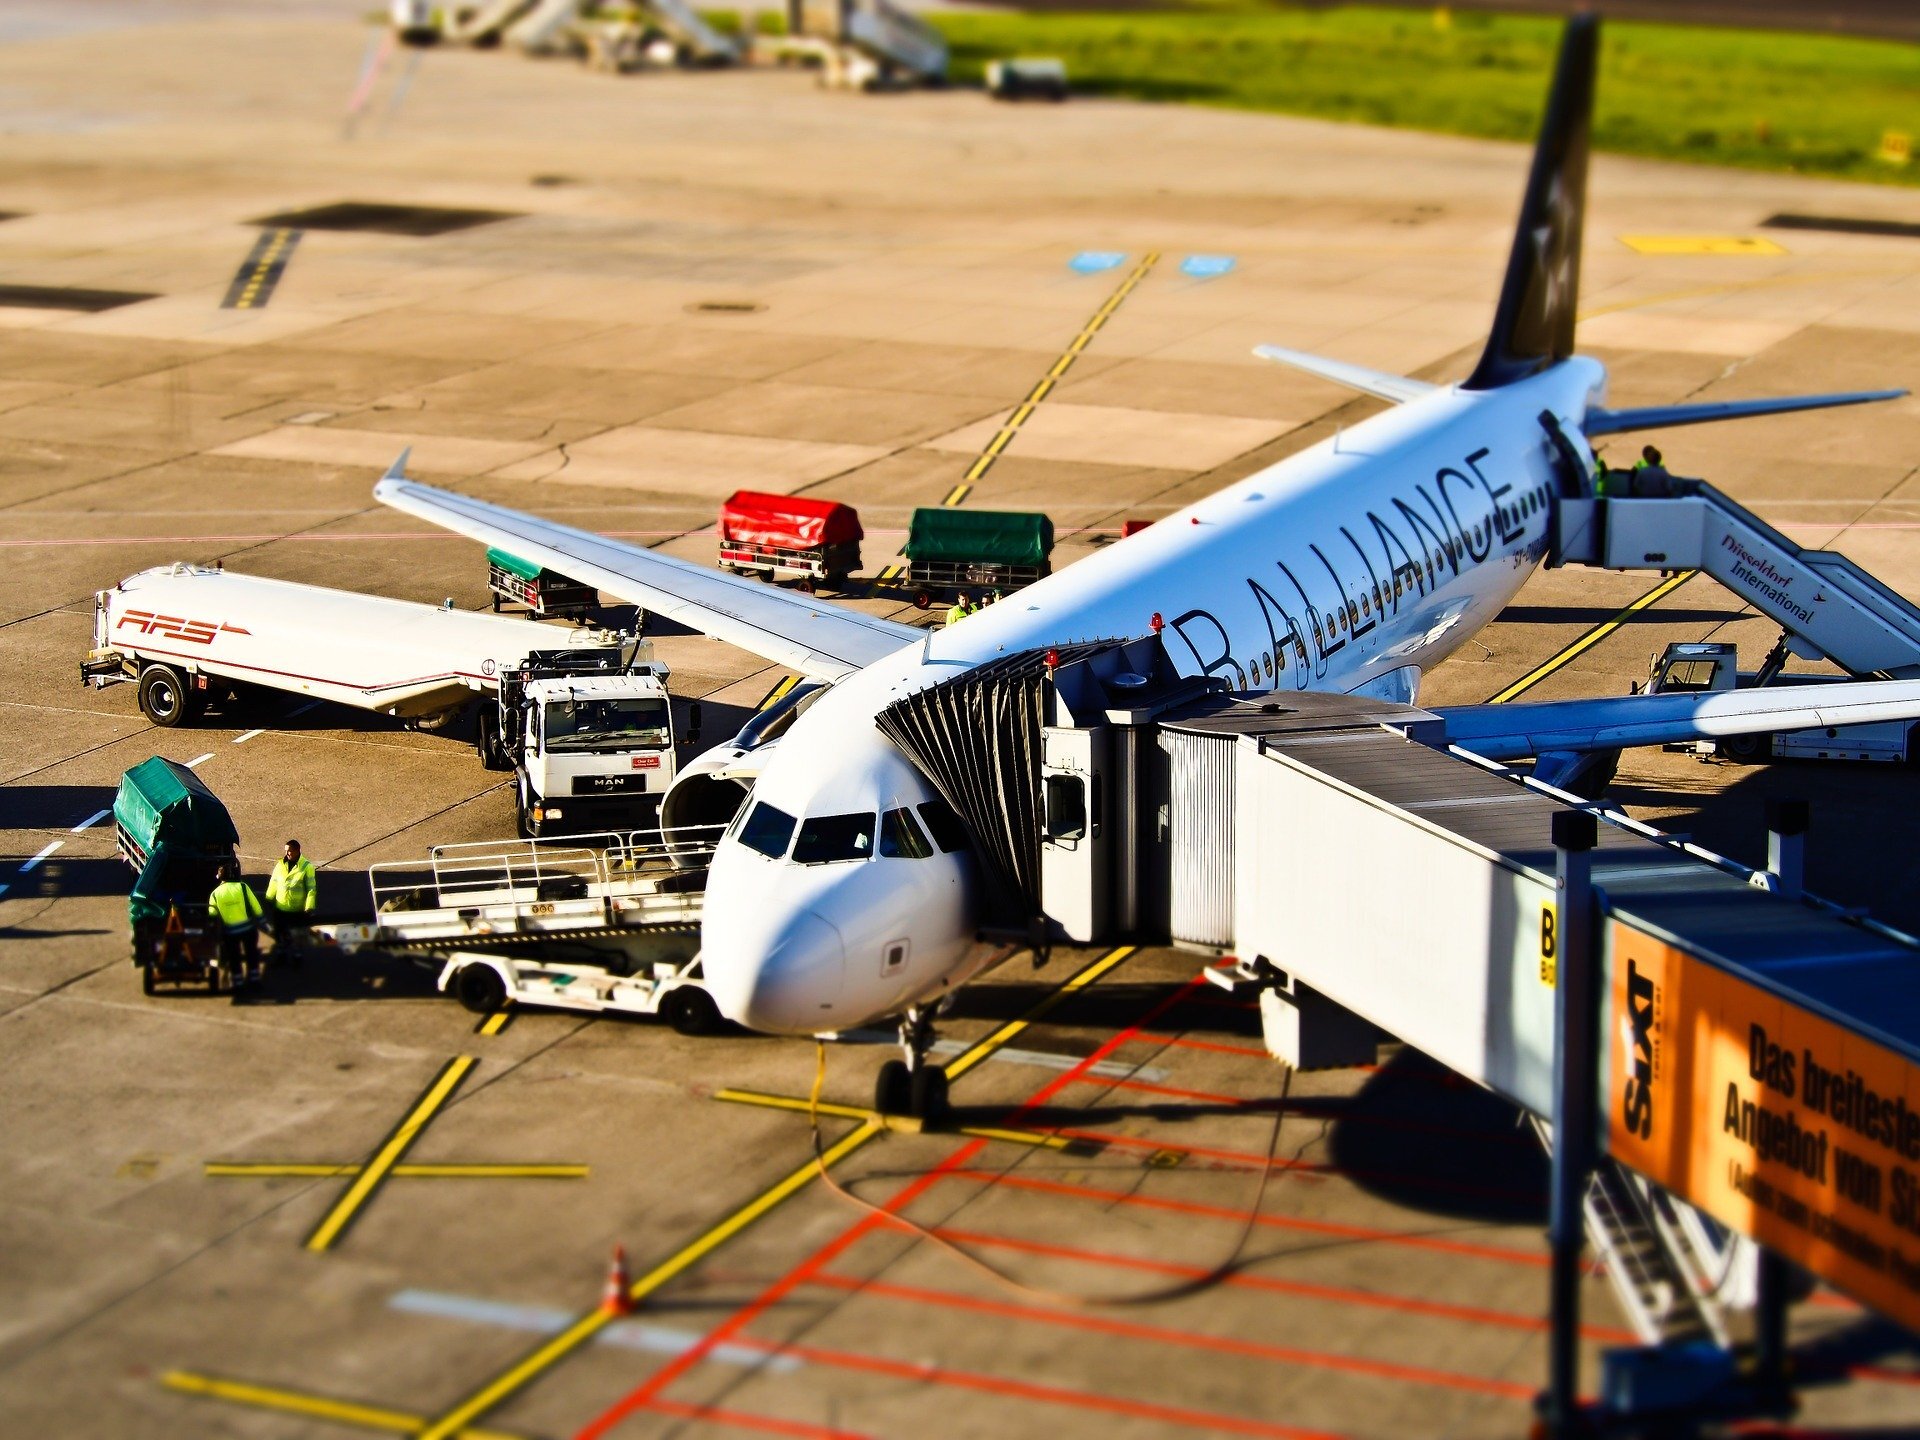 #Study finds that frequent-flyer programs increase cost of business travel